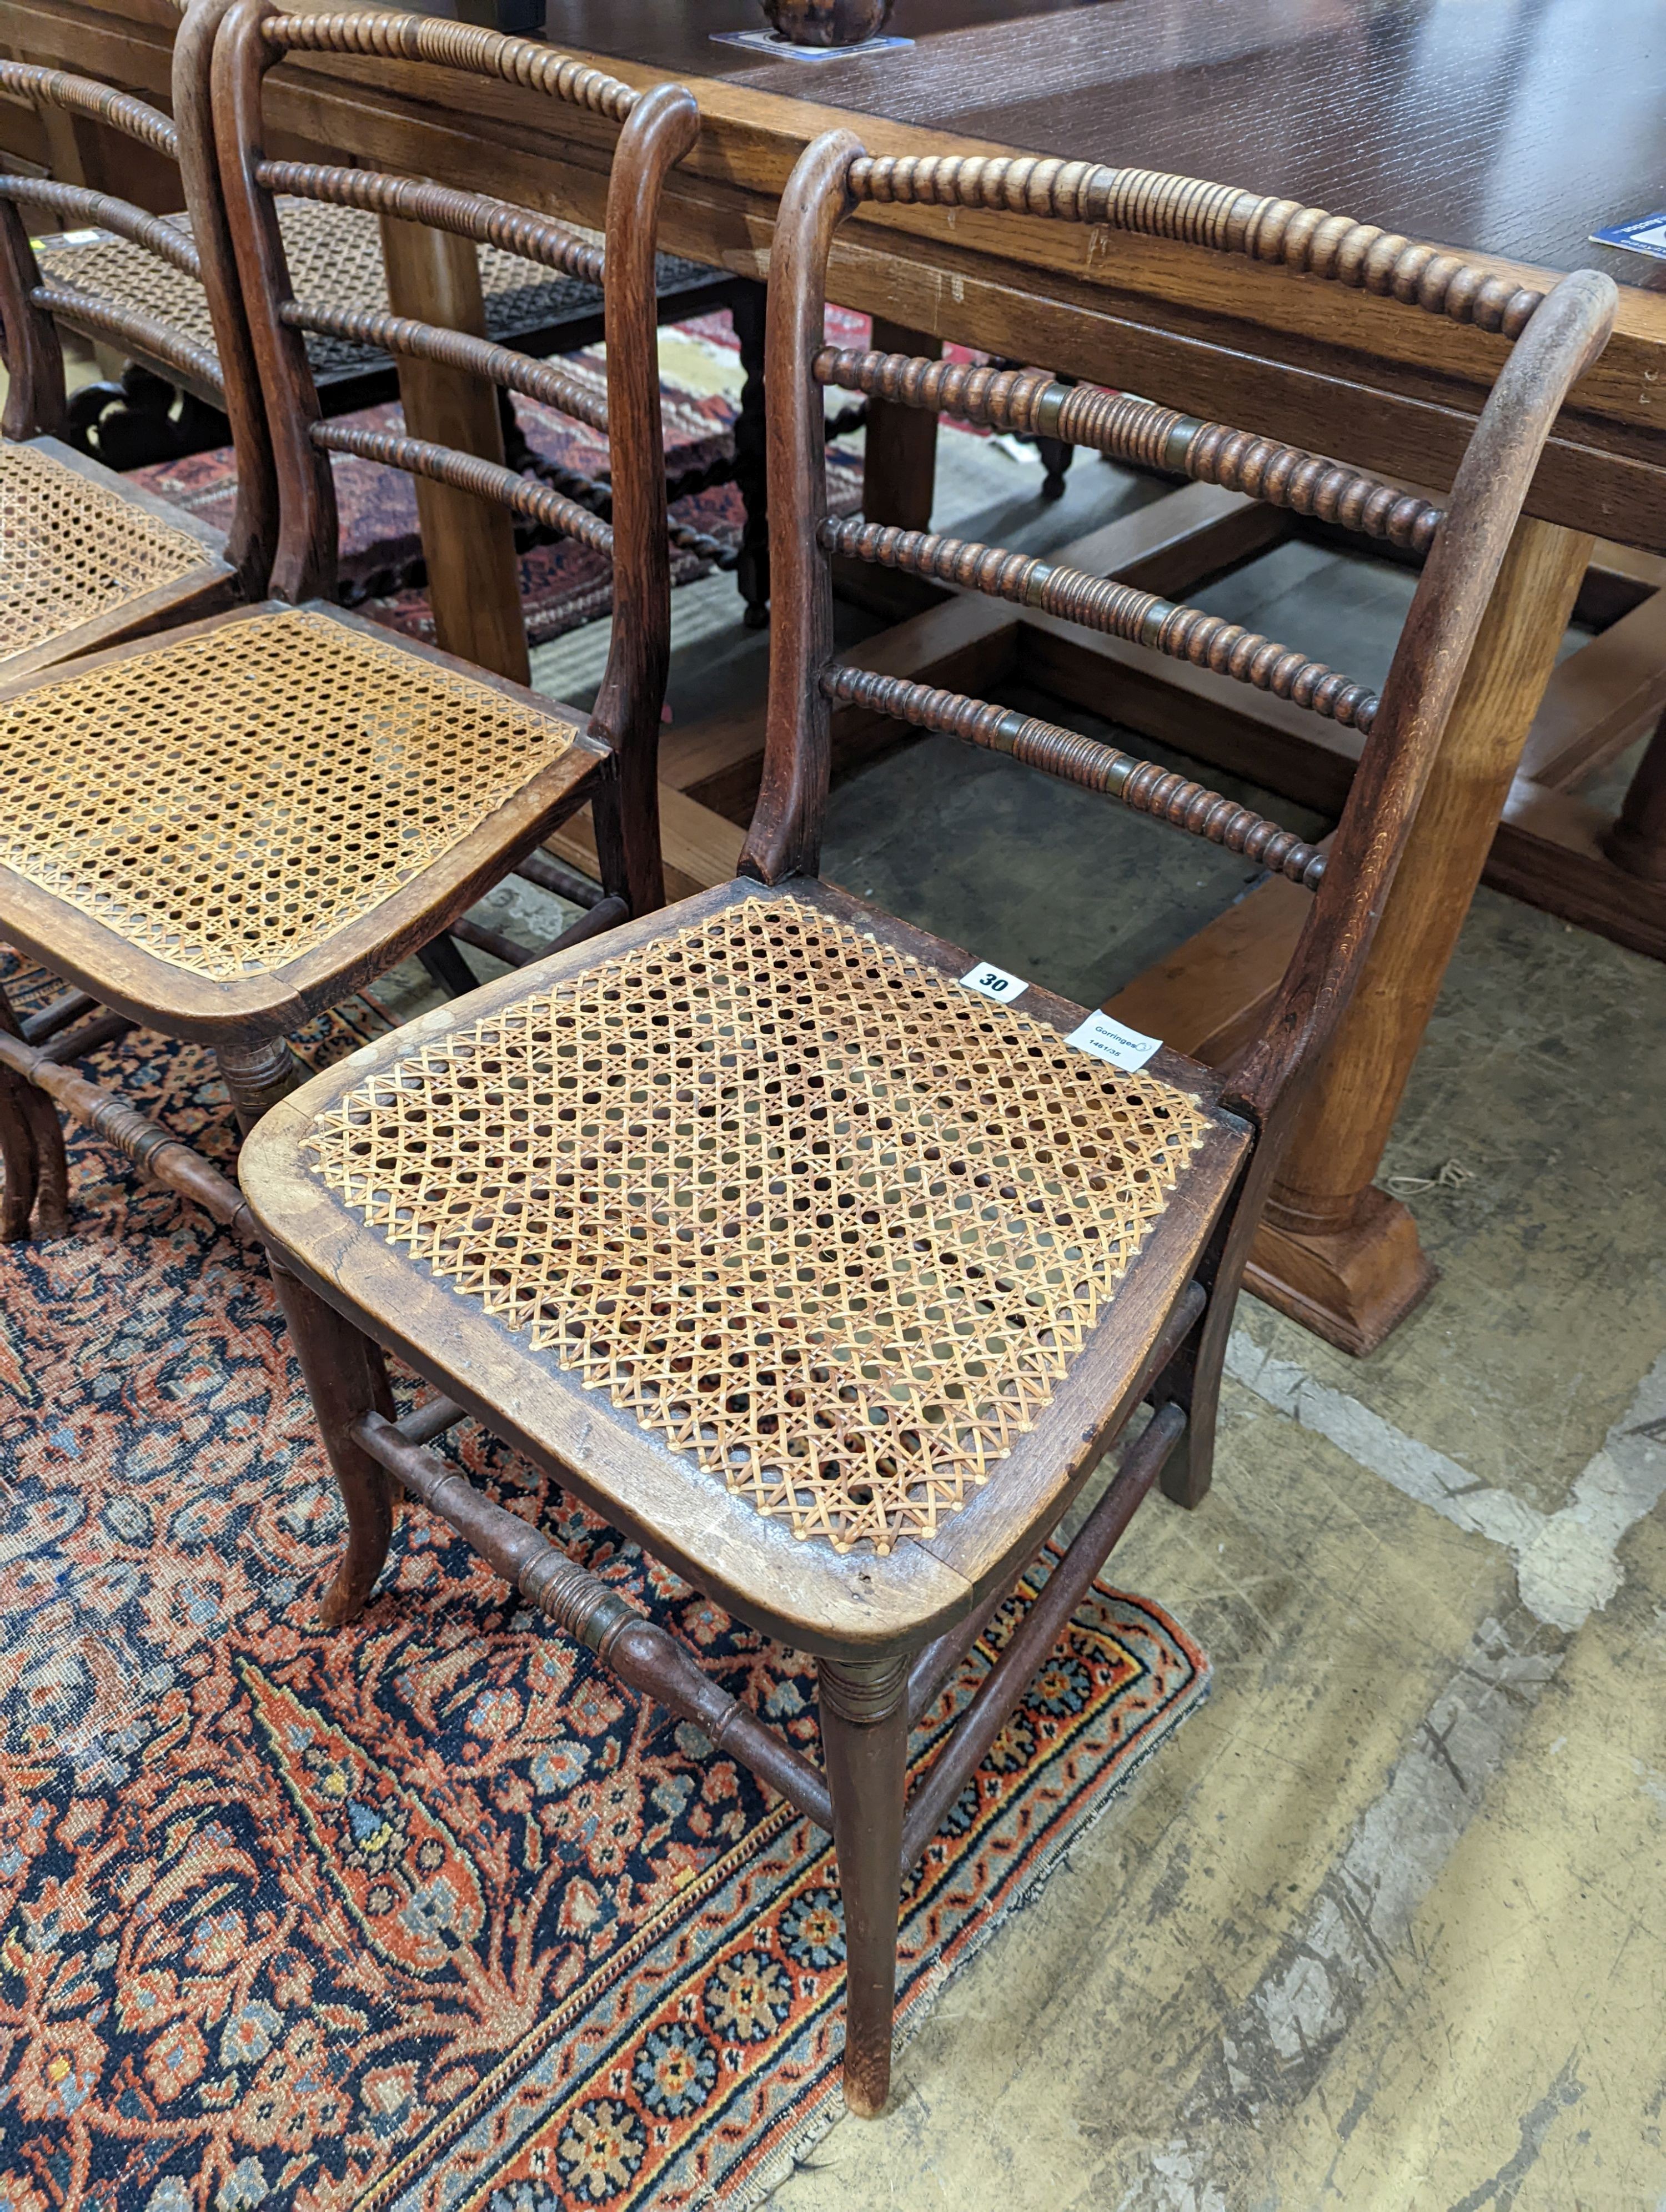 A set of three Regency provincial simulated rosewood cane seated dining chairs